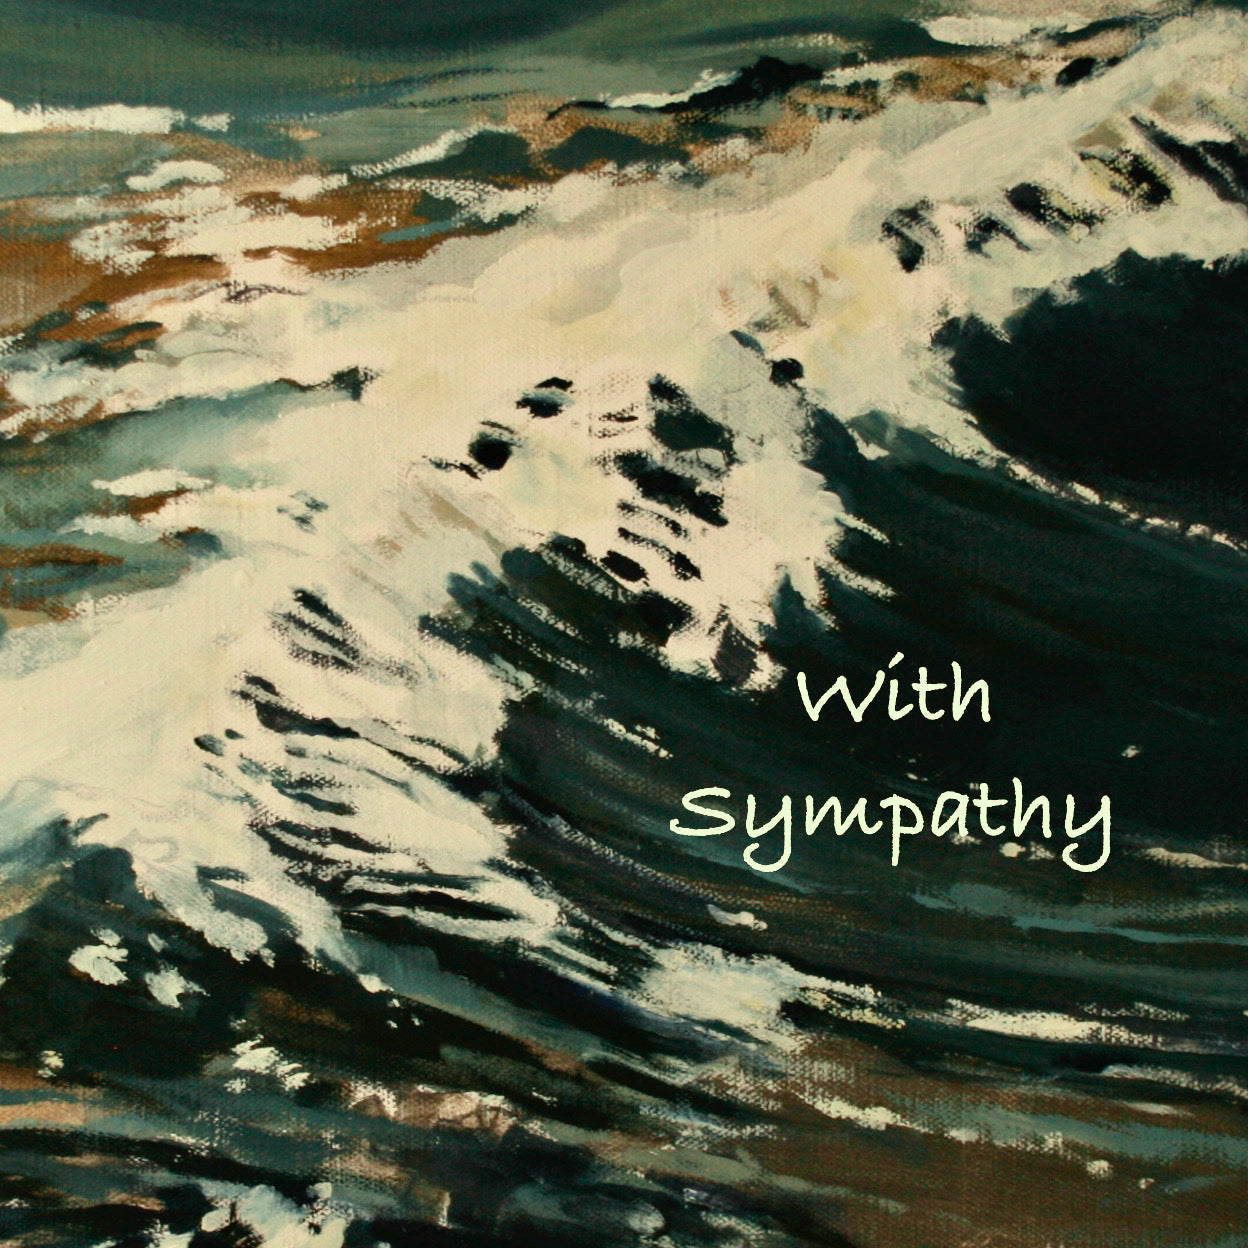 Ocean Wave With Sympathy Card - The Nancy Smillie Shop - Art, Jewellery & Designer Gifts Glasgow